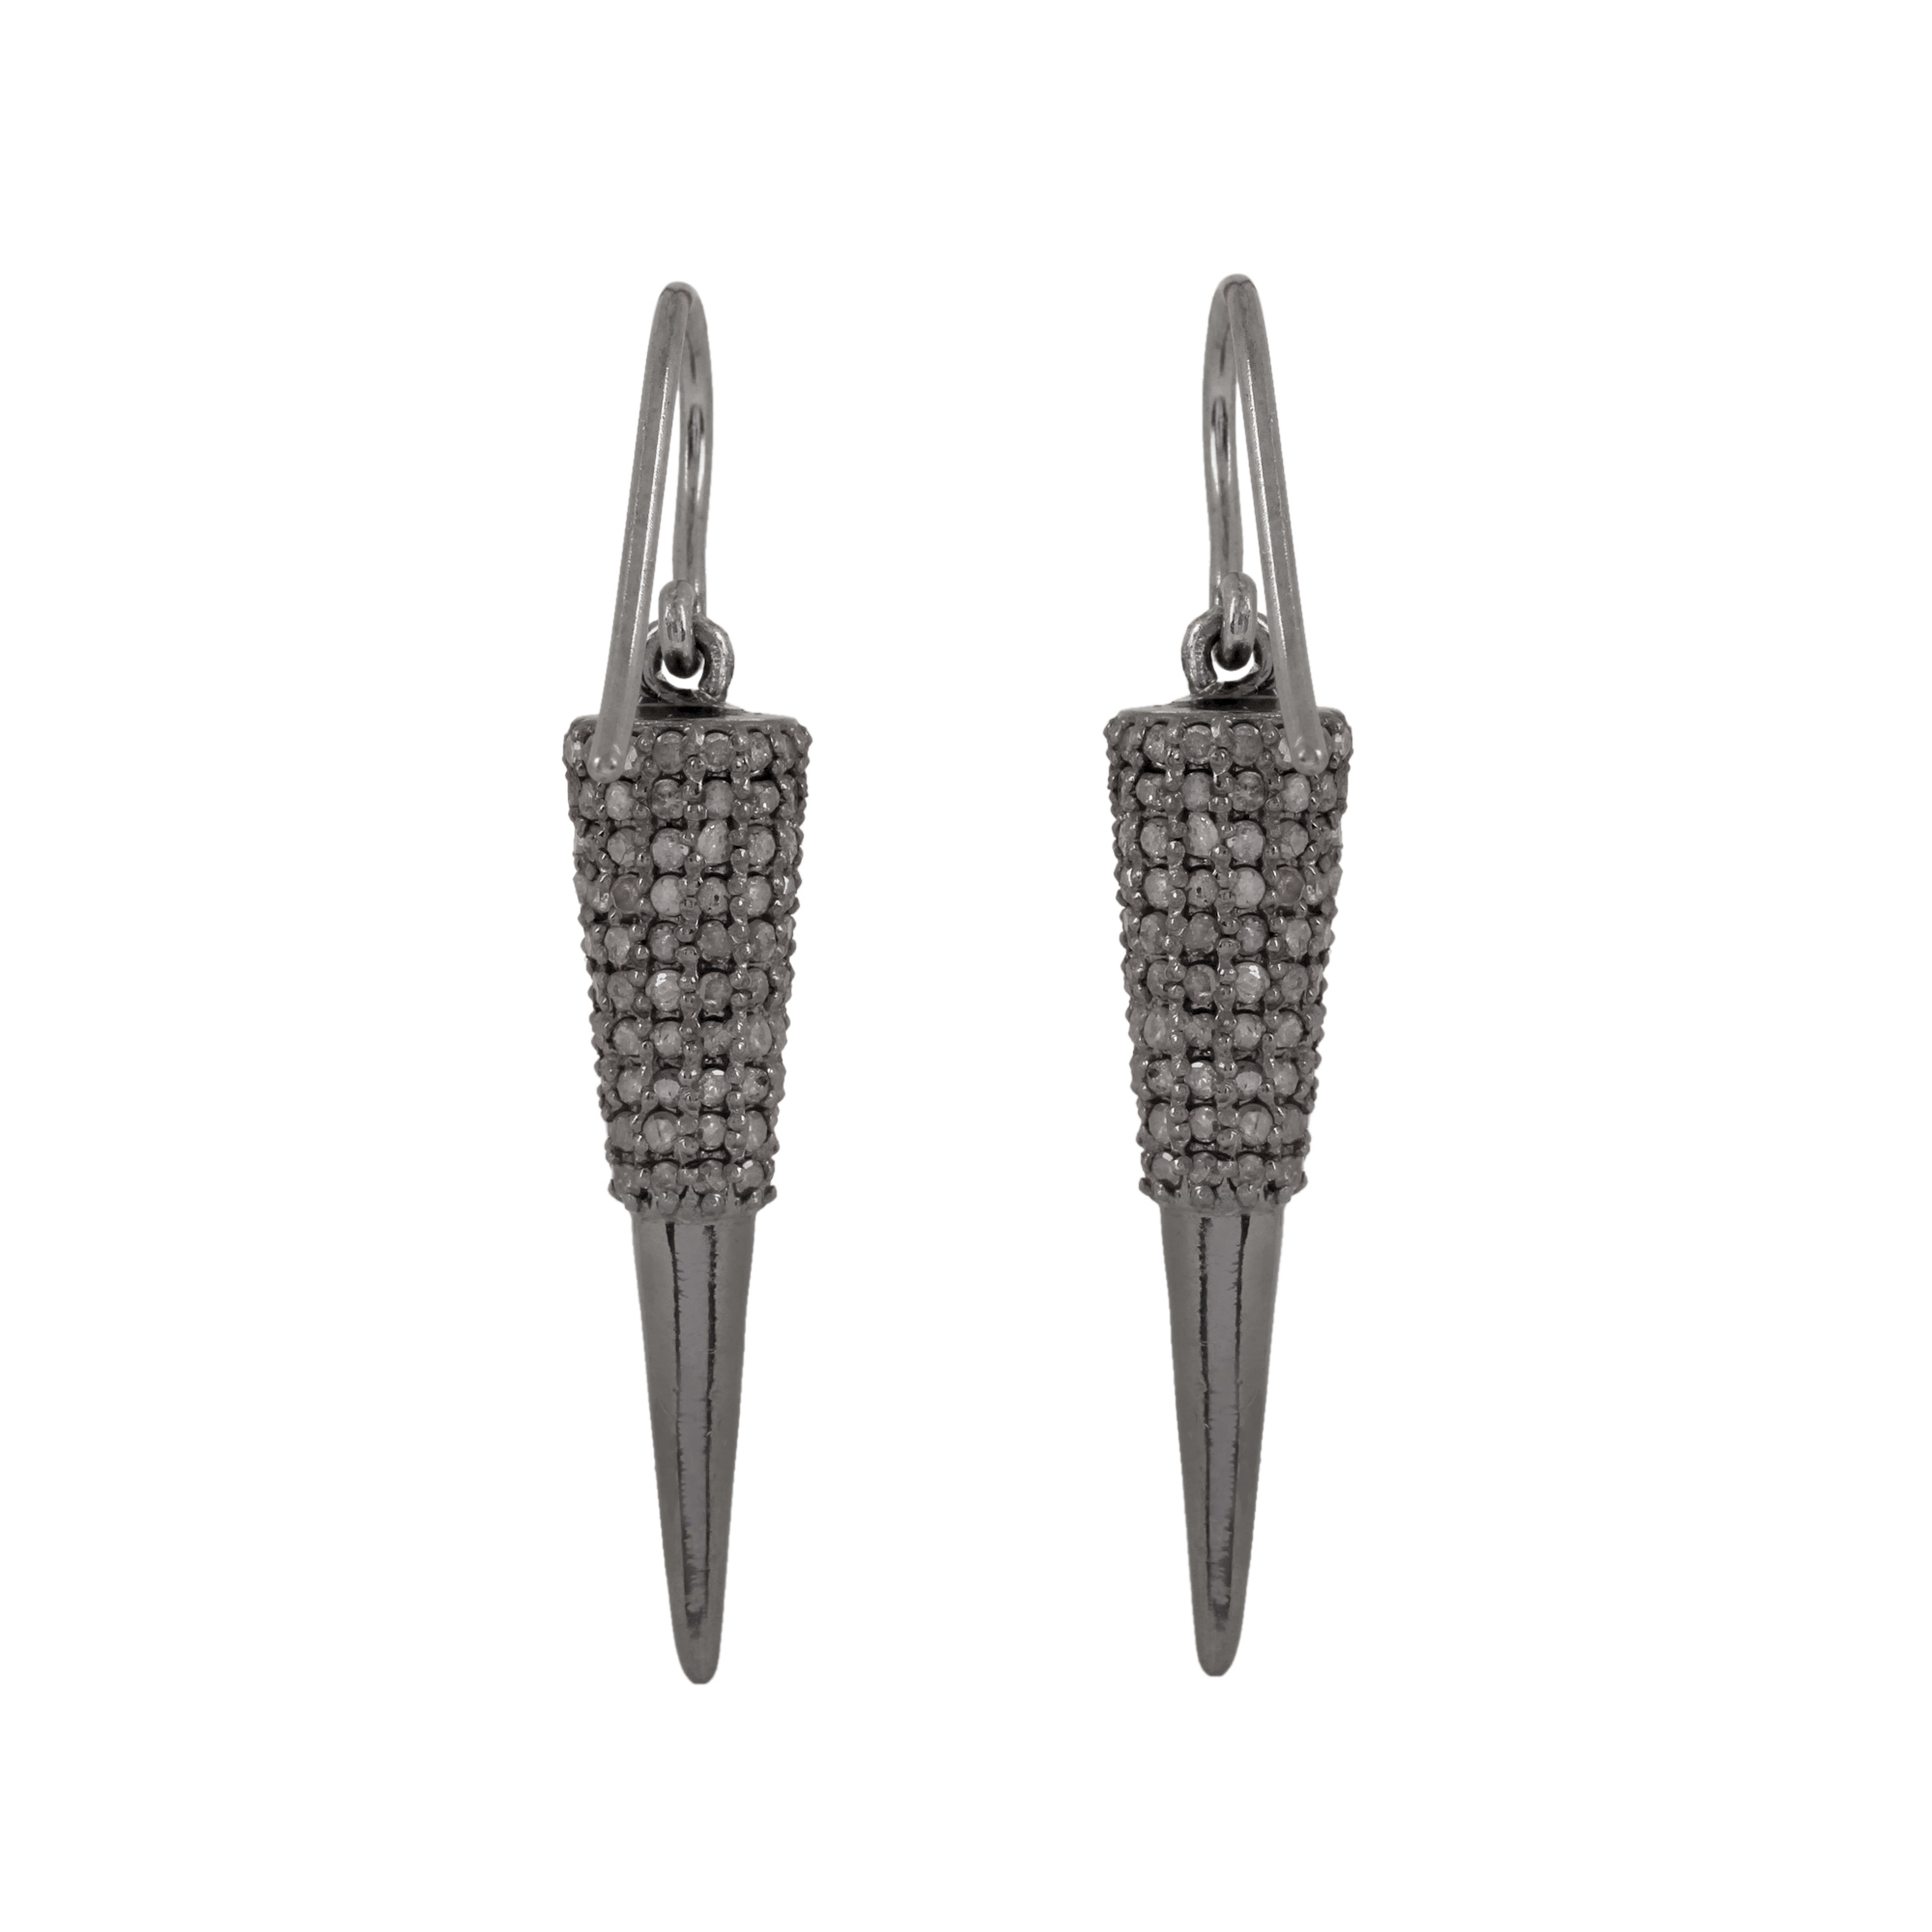 Hook earrings adorned with 2.60ct natural diamond 925 sterling silver jewelry